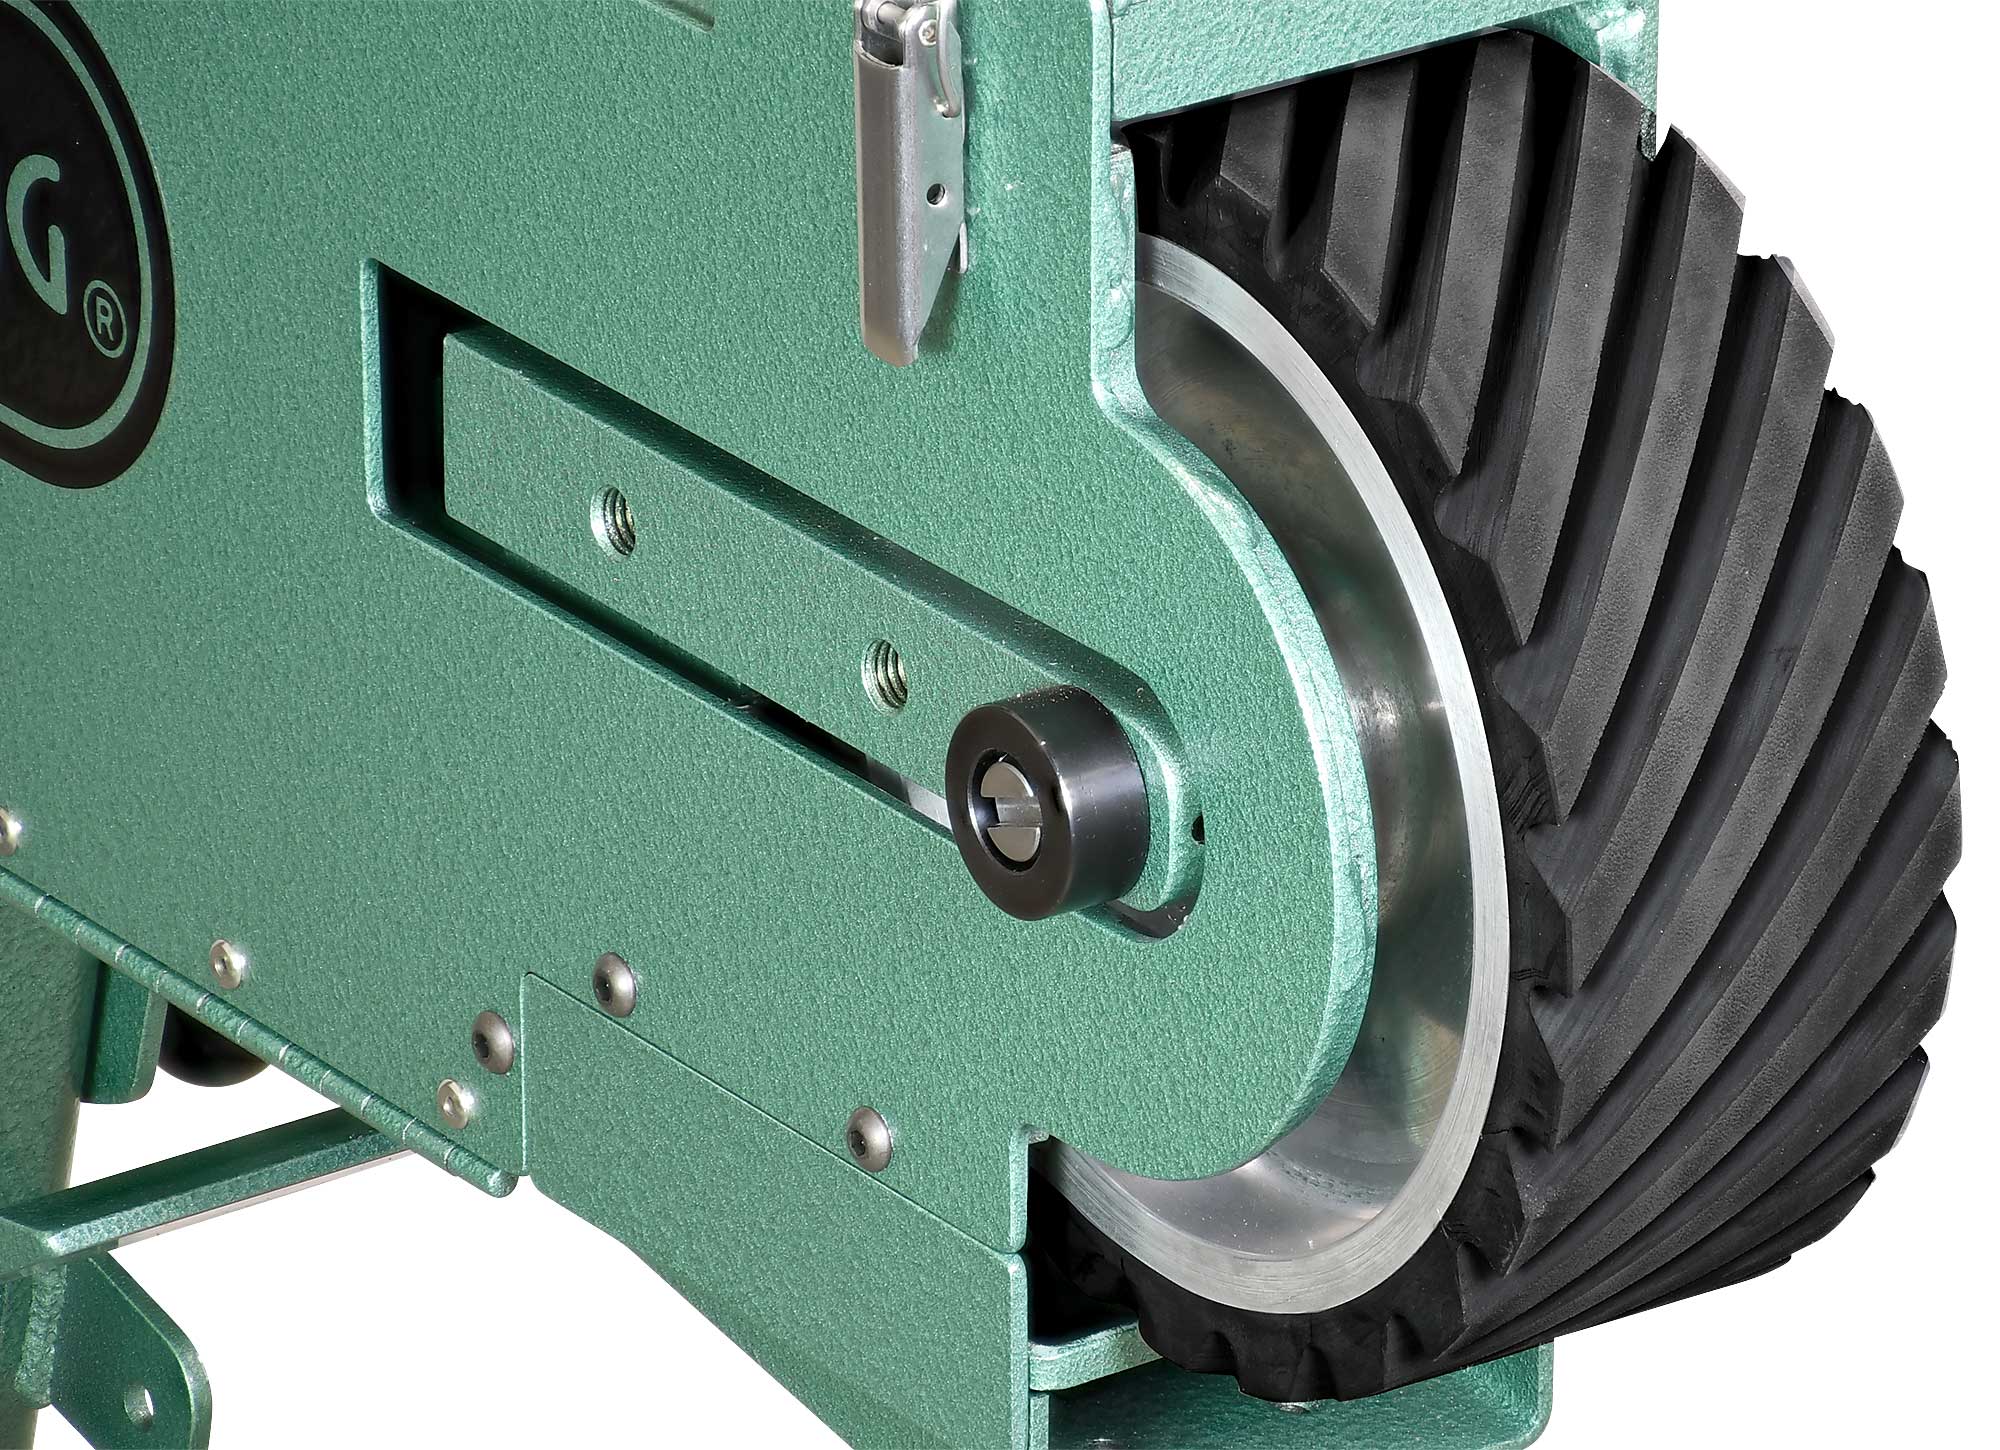 The serrated contact wheel comes standard on the aggressive grinding Model 979